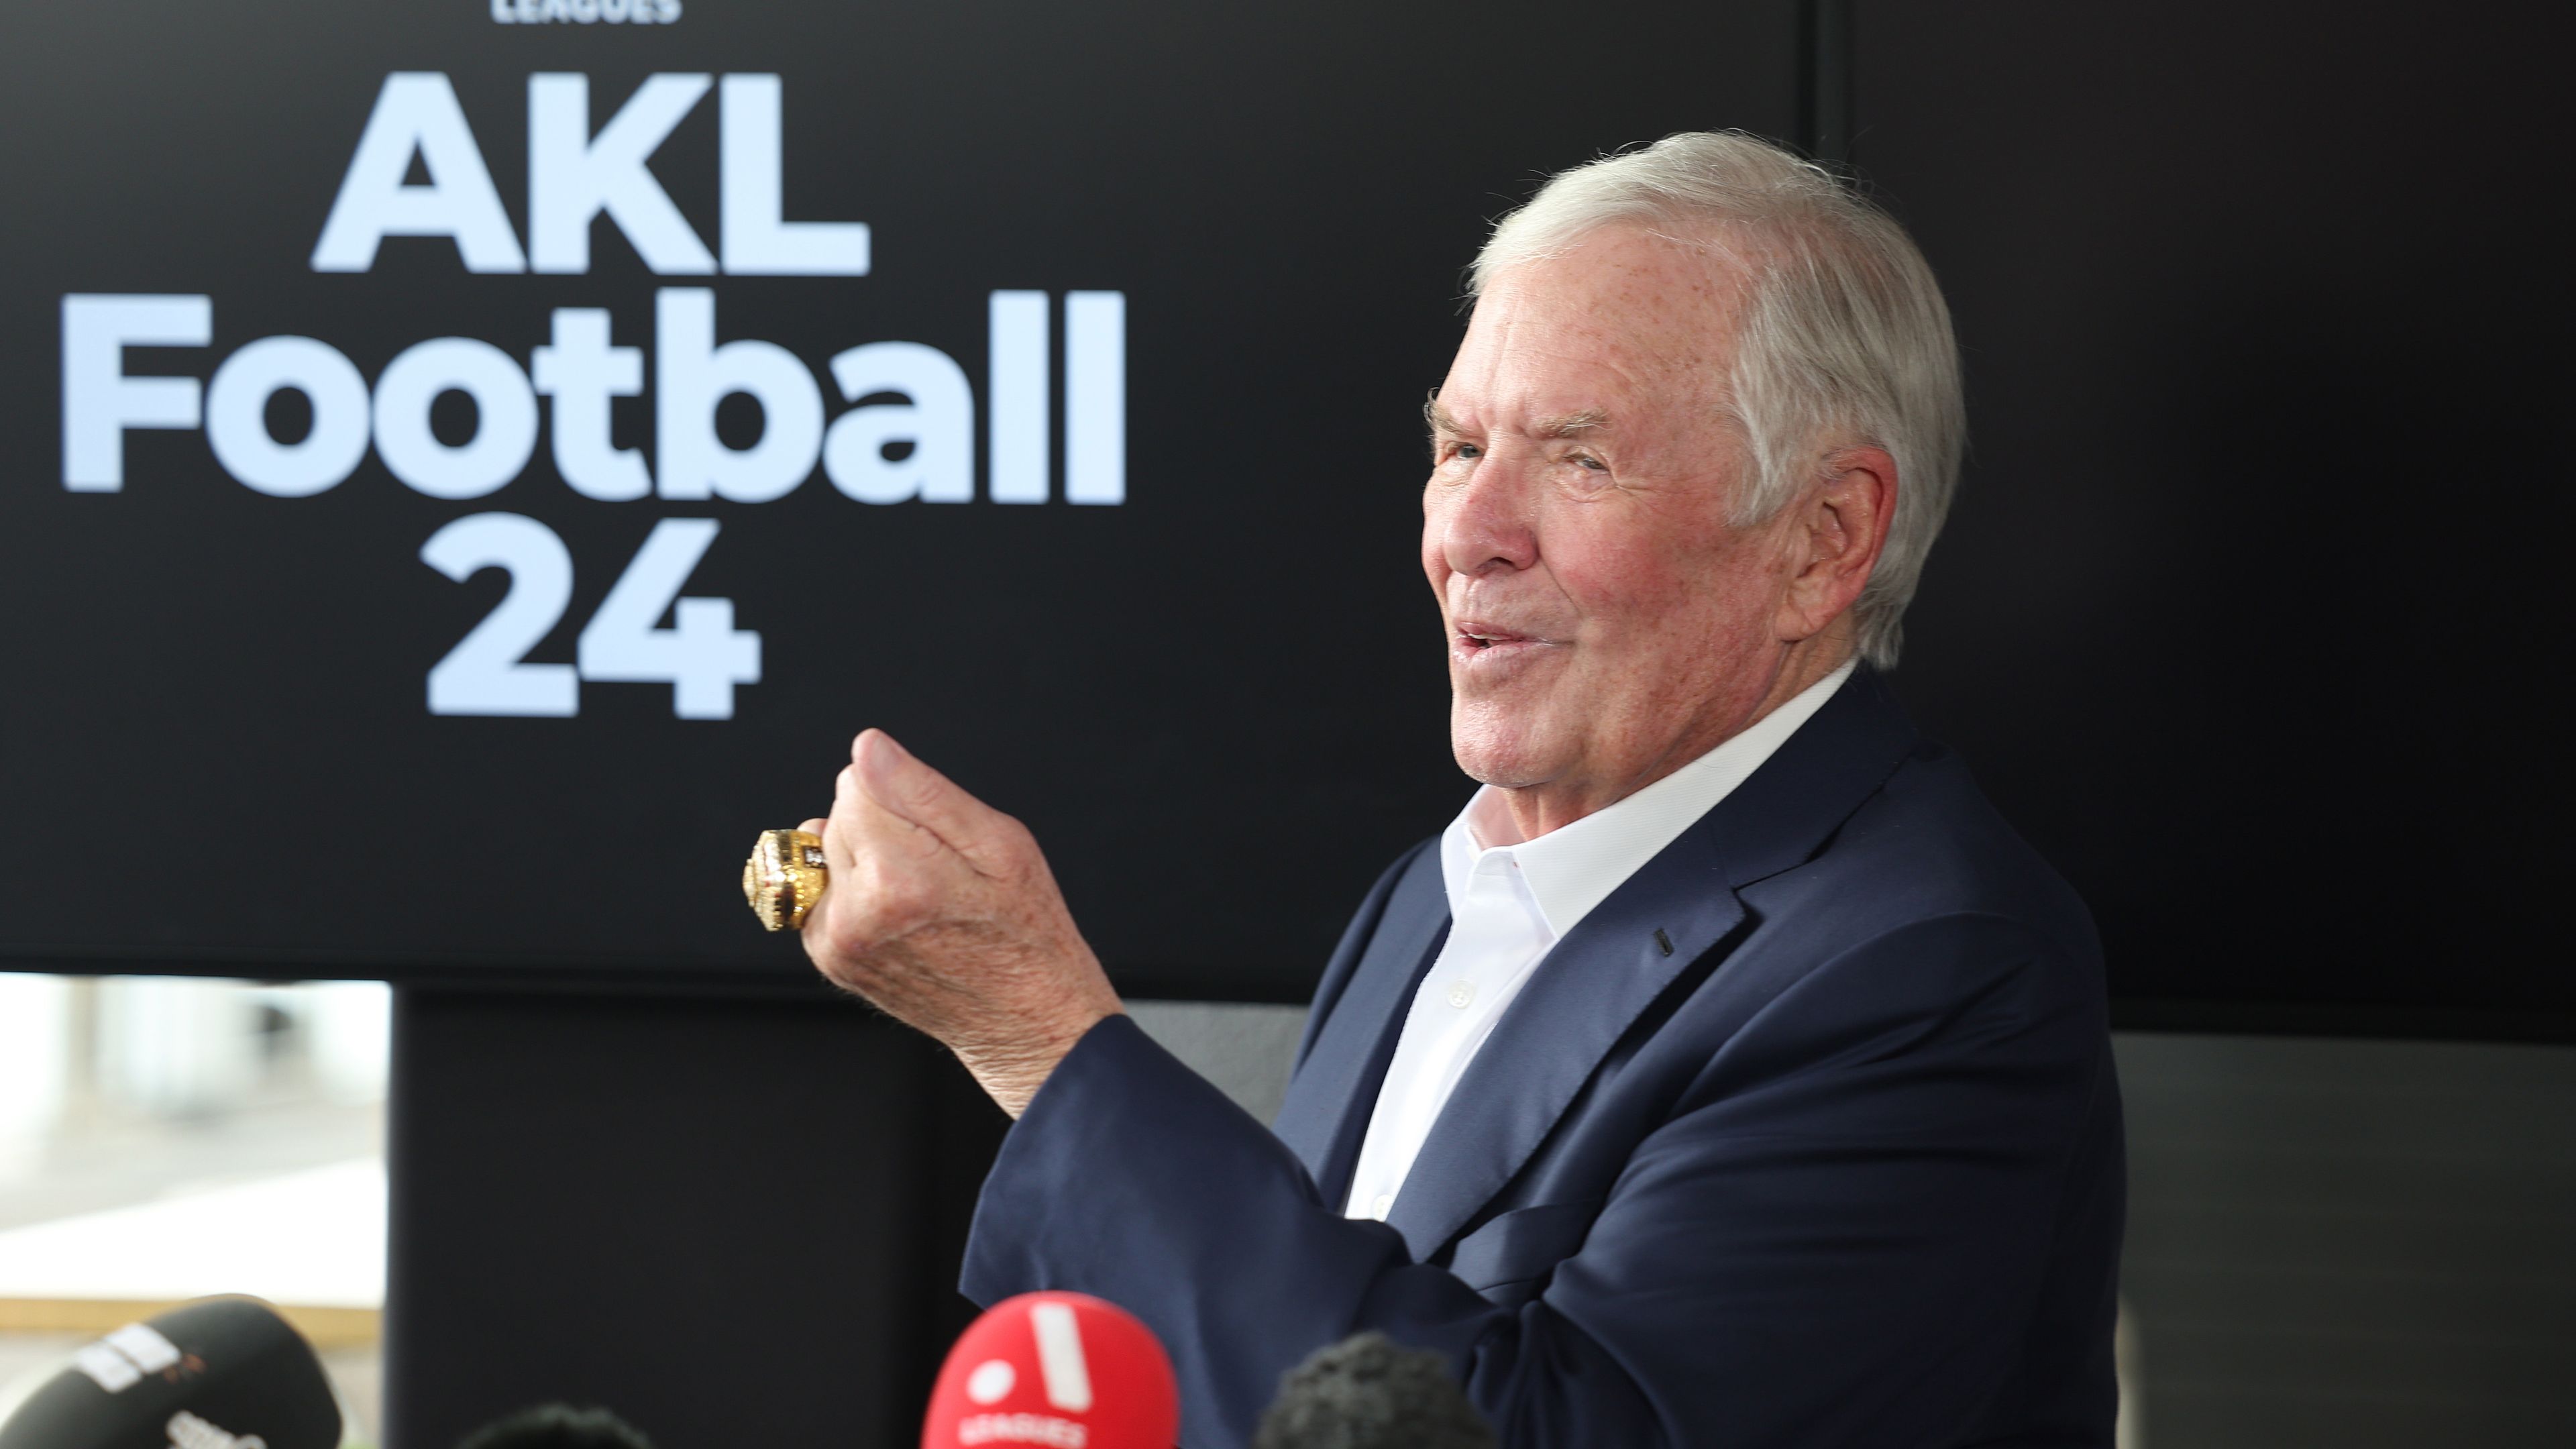 American billionaire secures A-Leagues licence as Auckland confirmed as expansion club